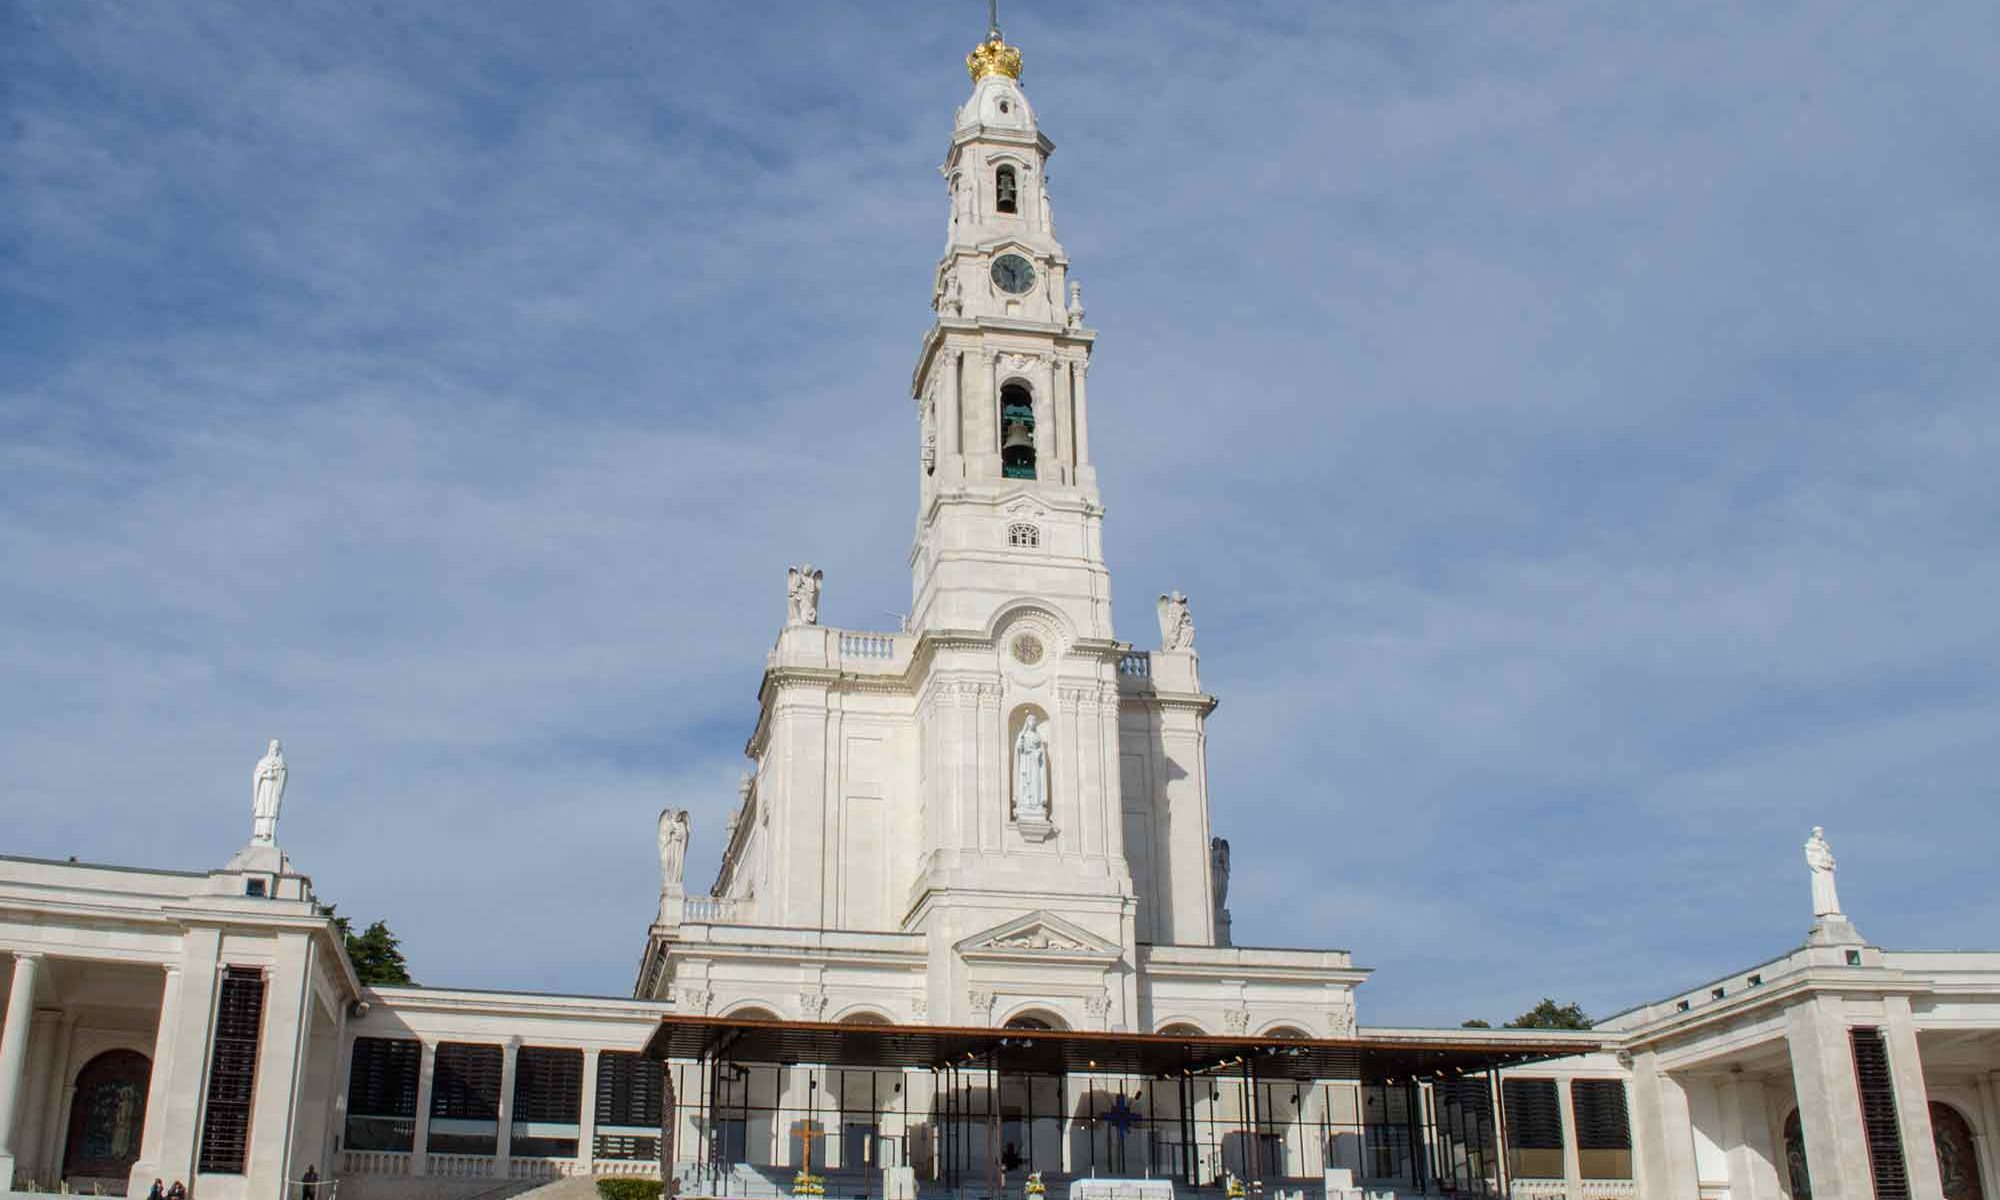 Basilica of Our Lady of the Rosary (Fatima)